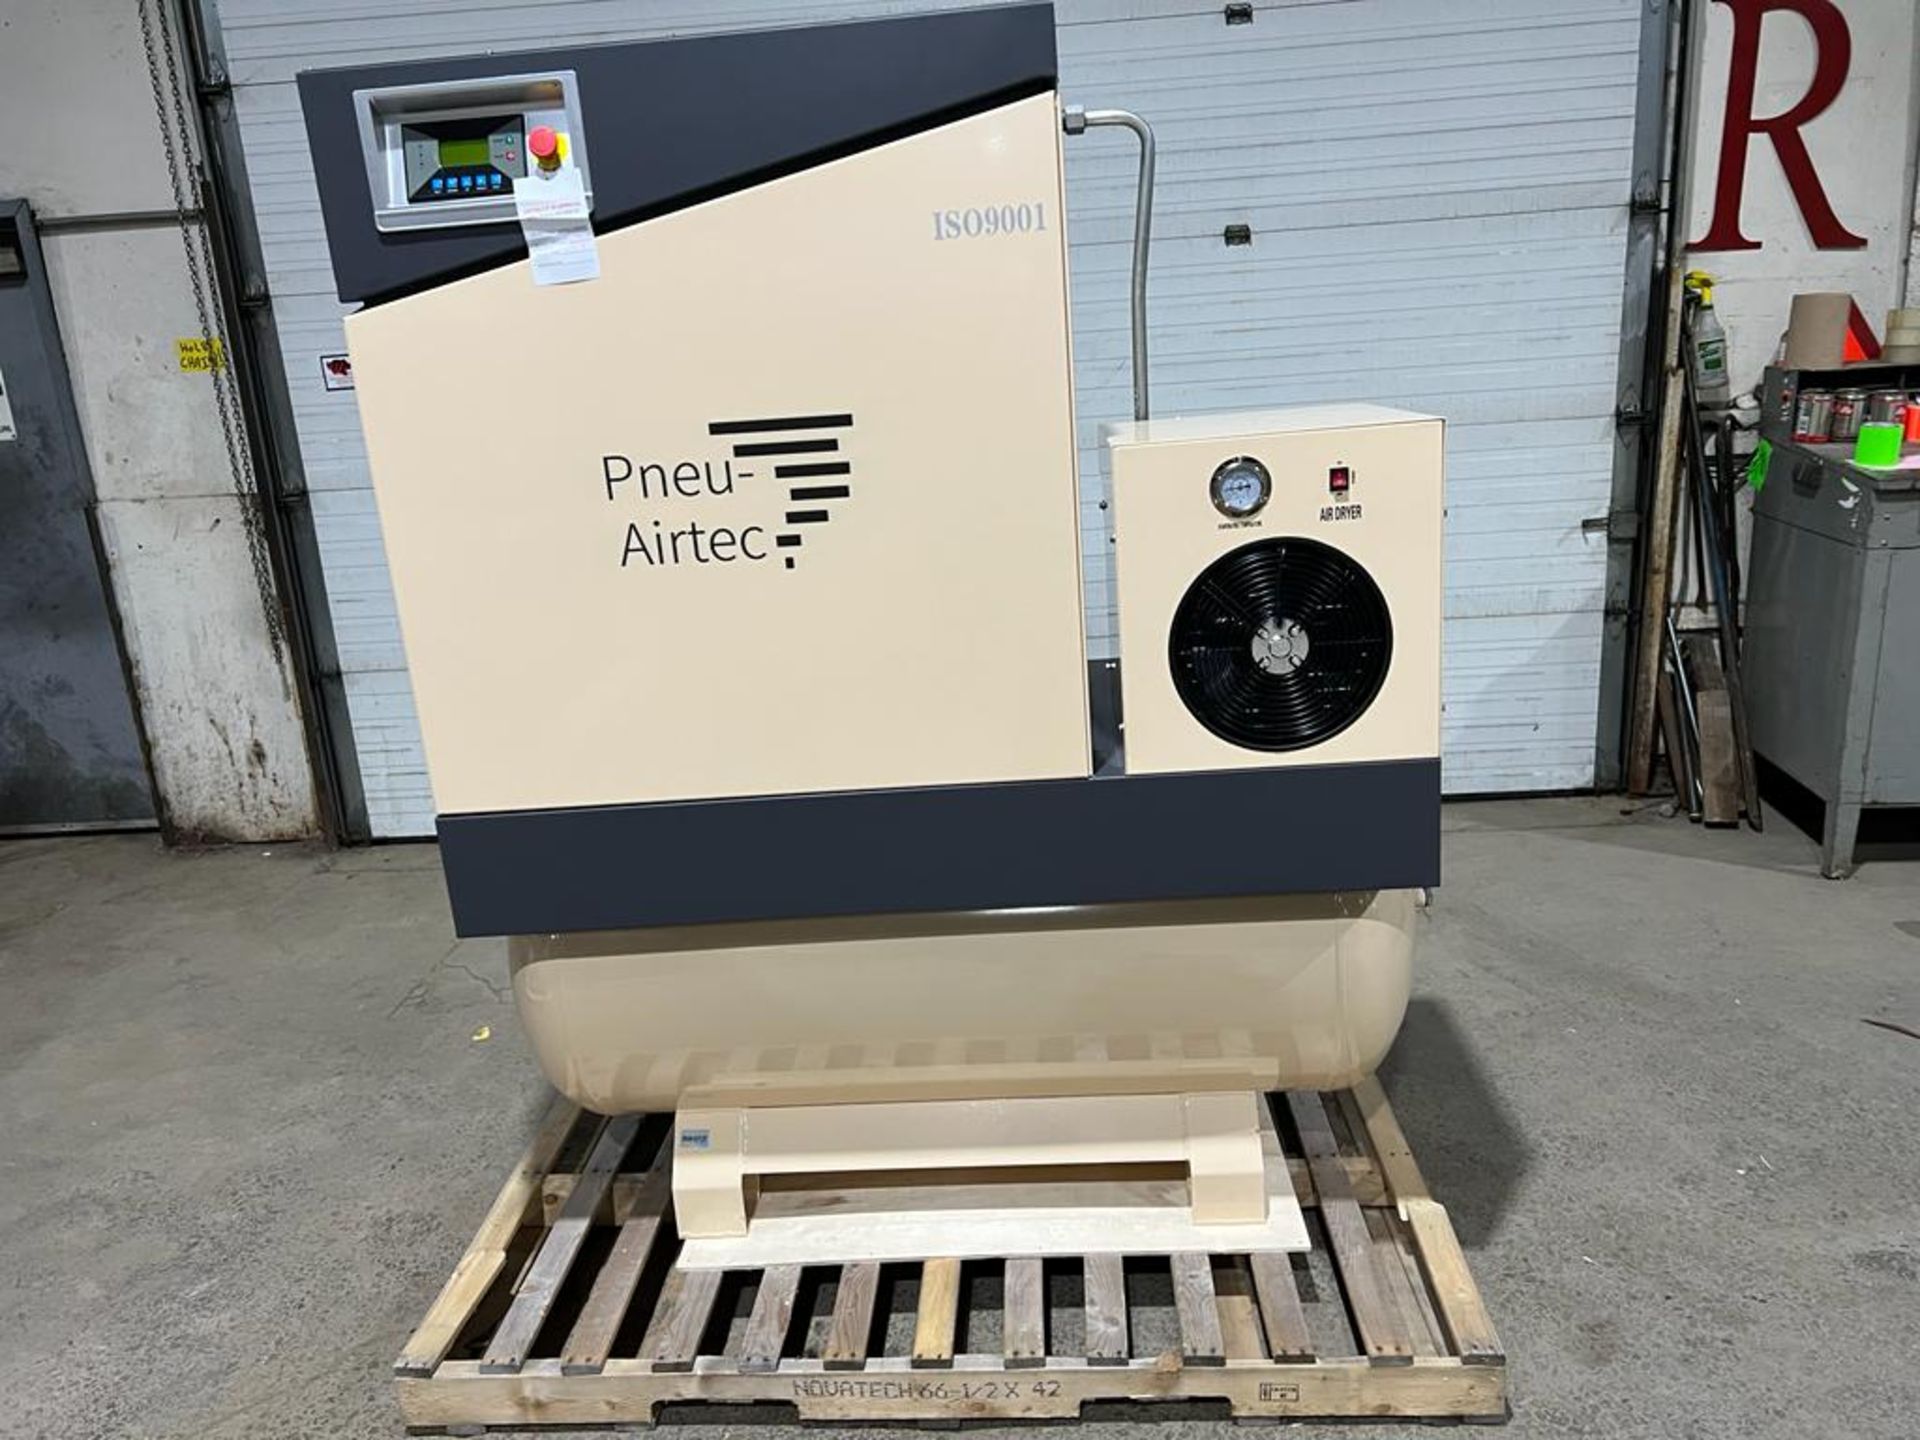 Pneu-Airtec model 20FF - 20HP Air Compressor with built on DRYER - MINT UNUSED COMPRESSOR with - Image 2 of 5